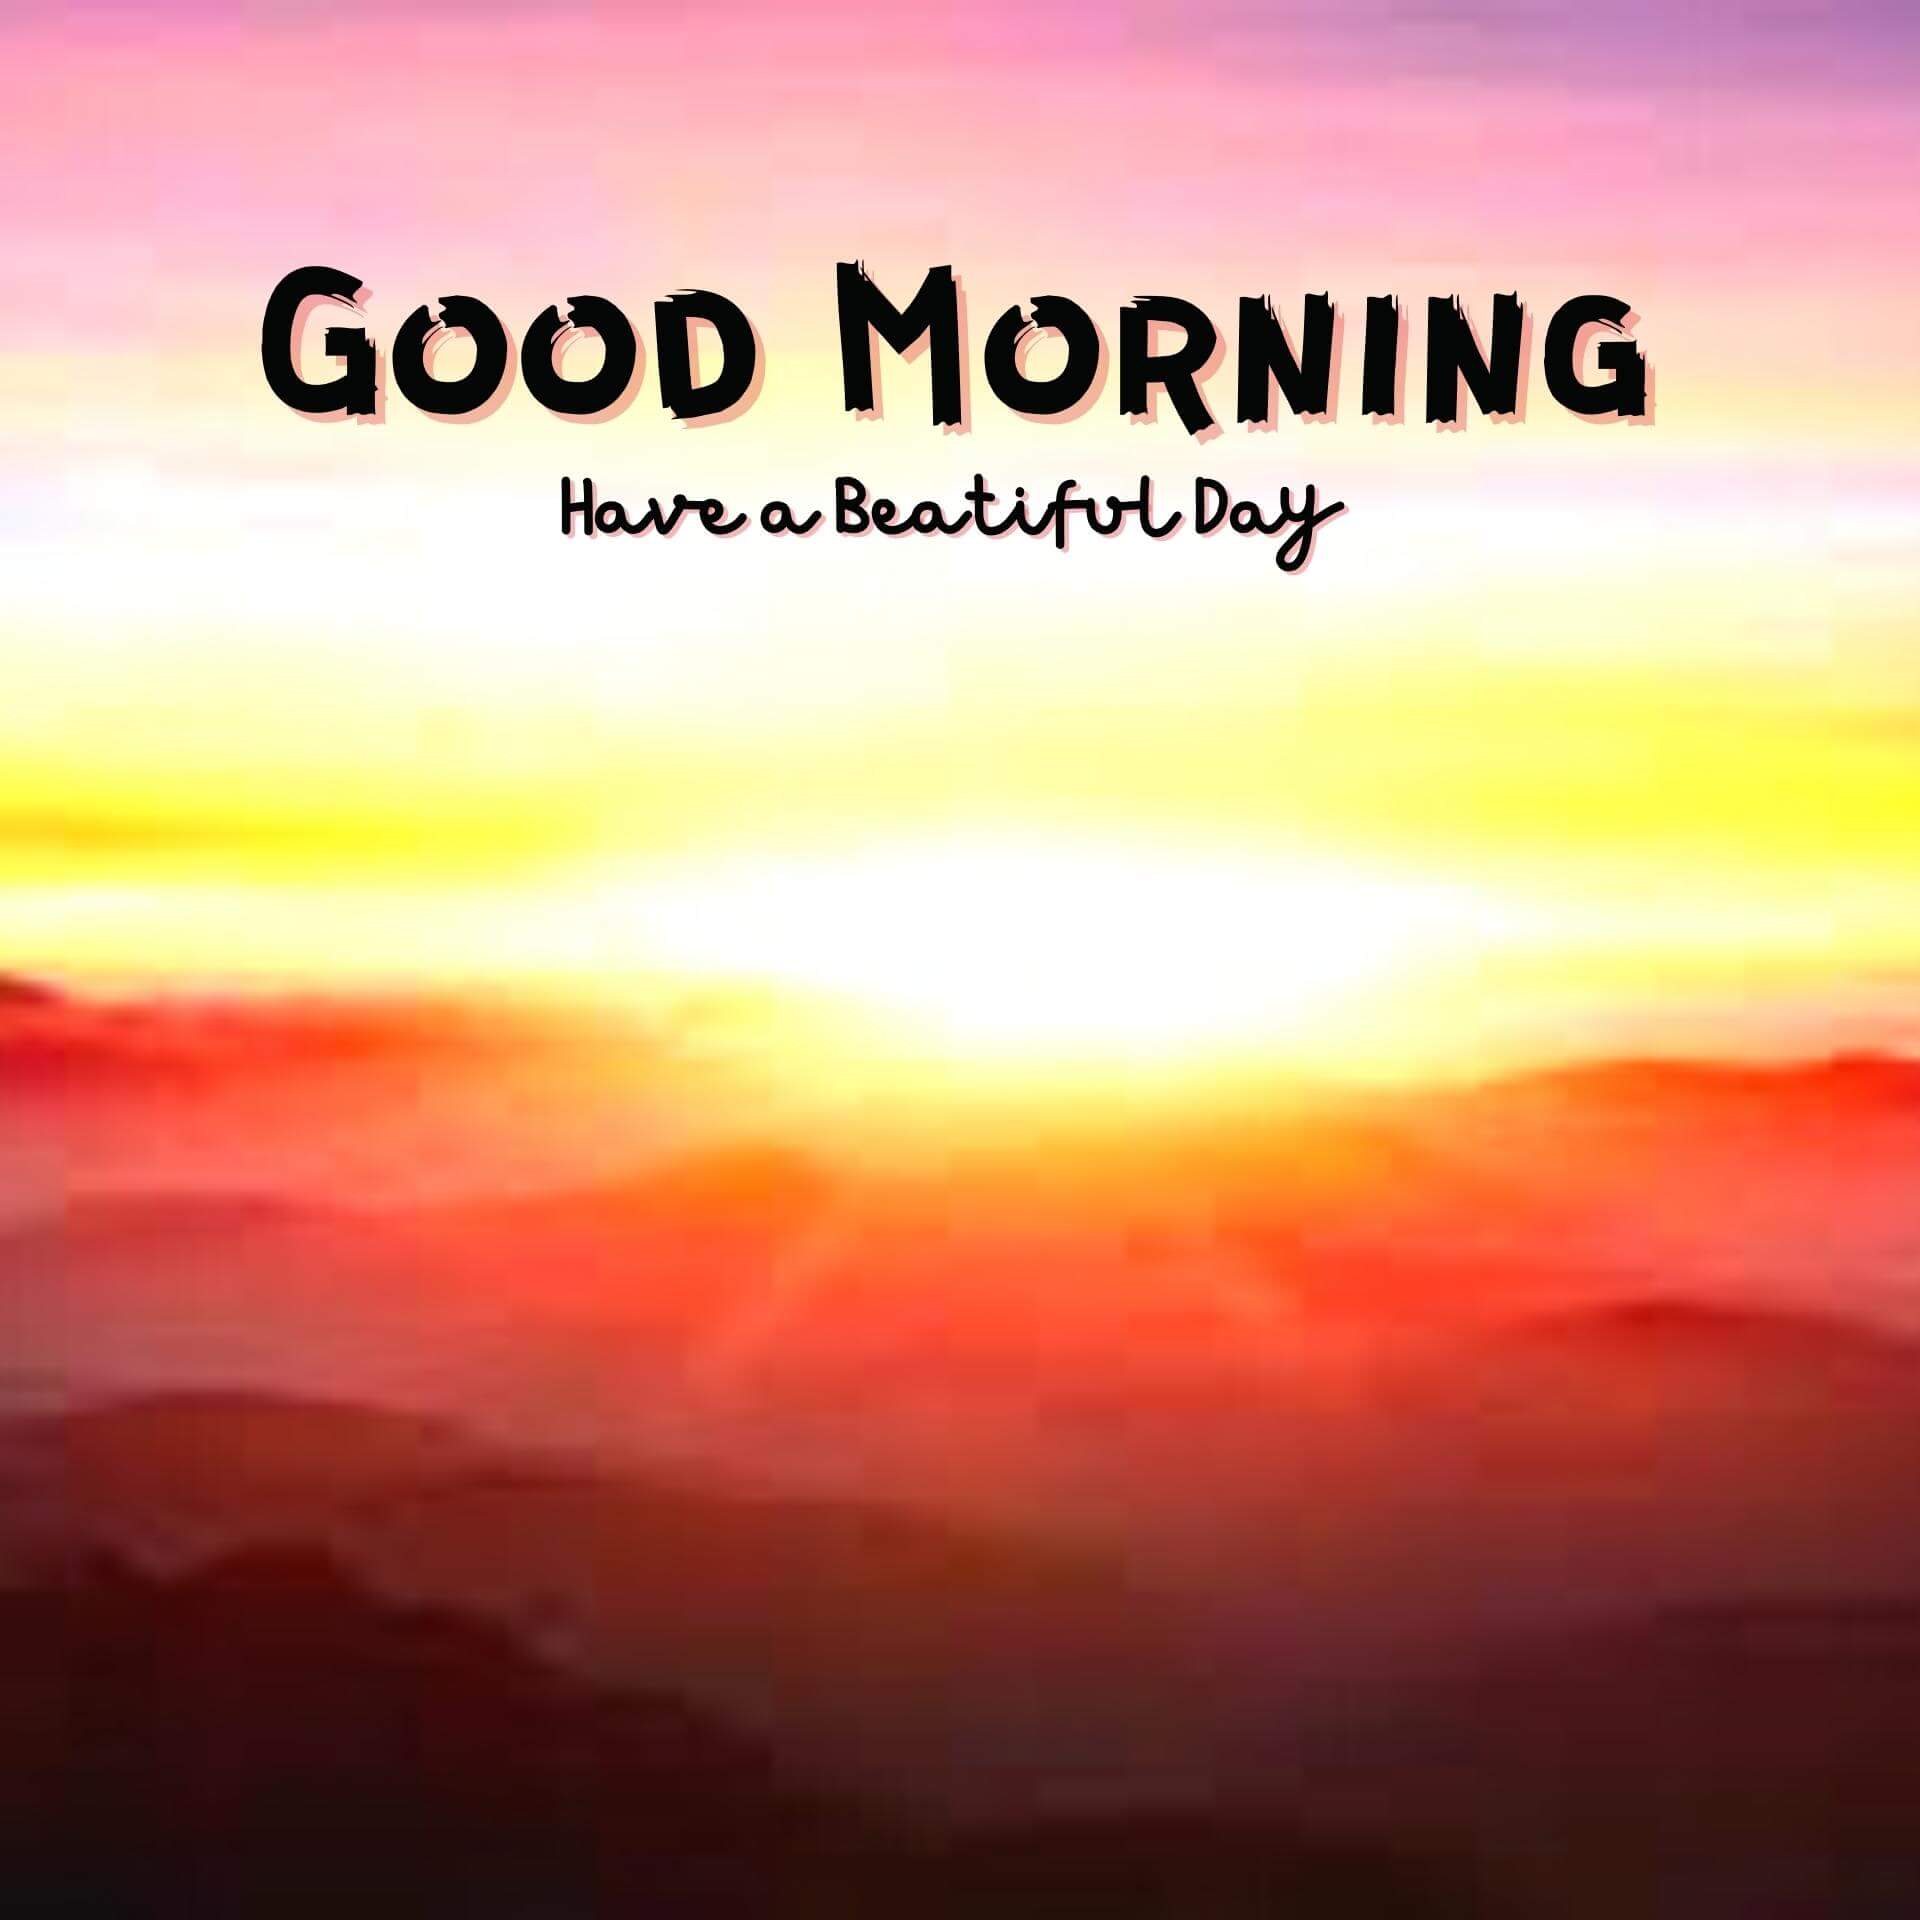 good morning wishes hd images free download